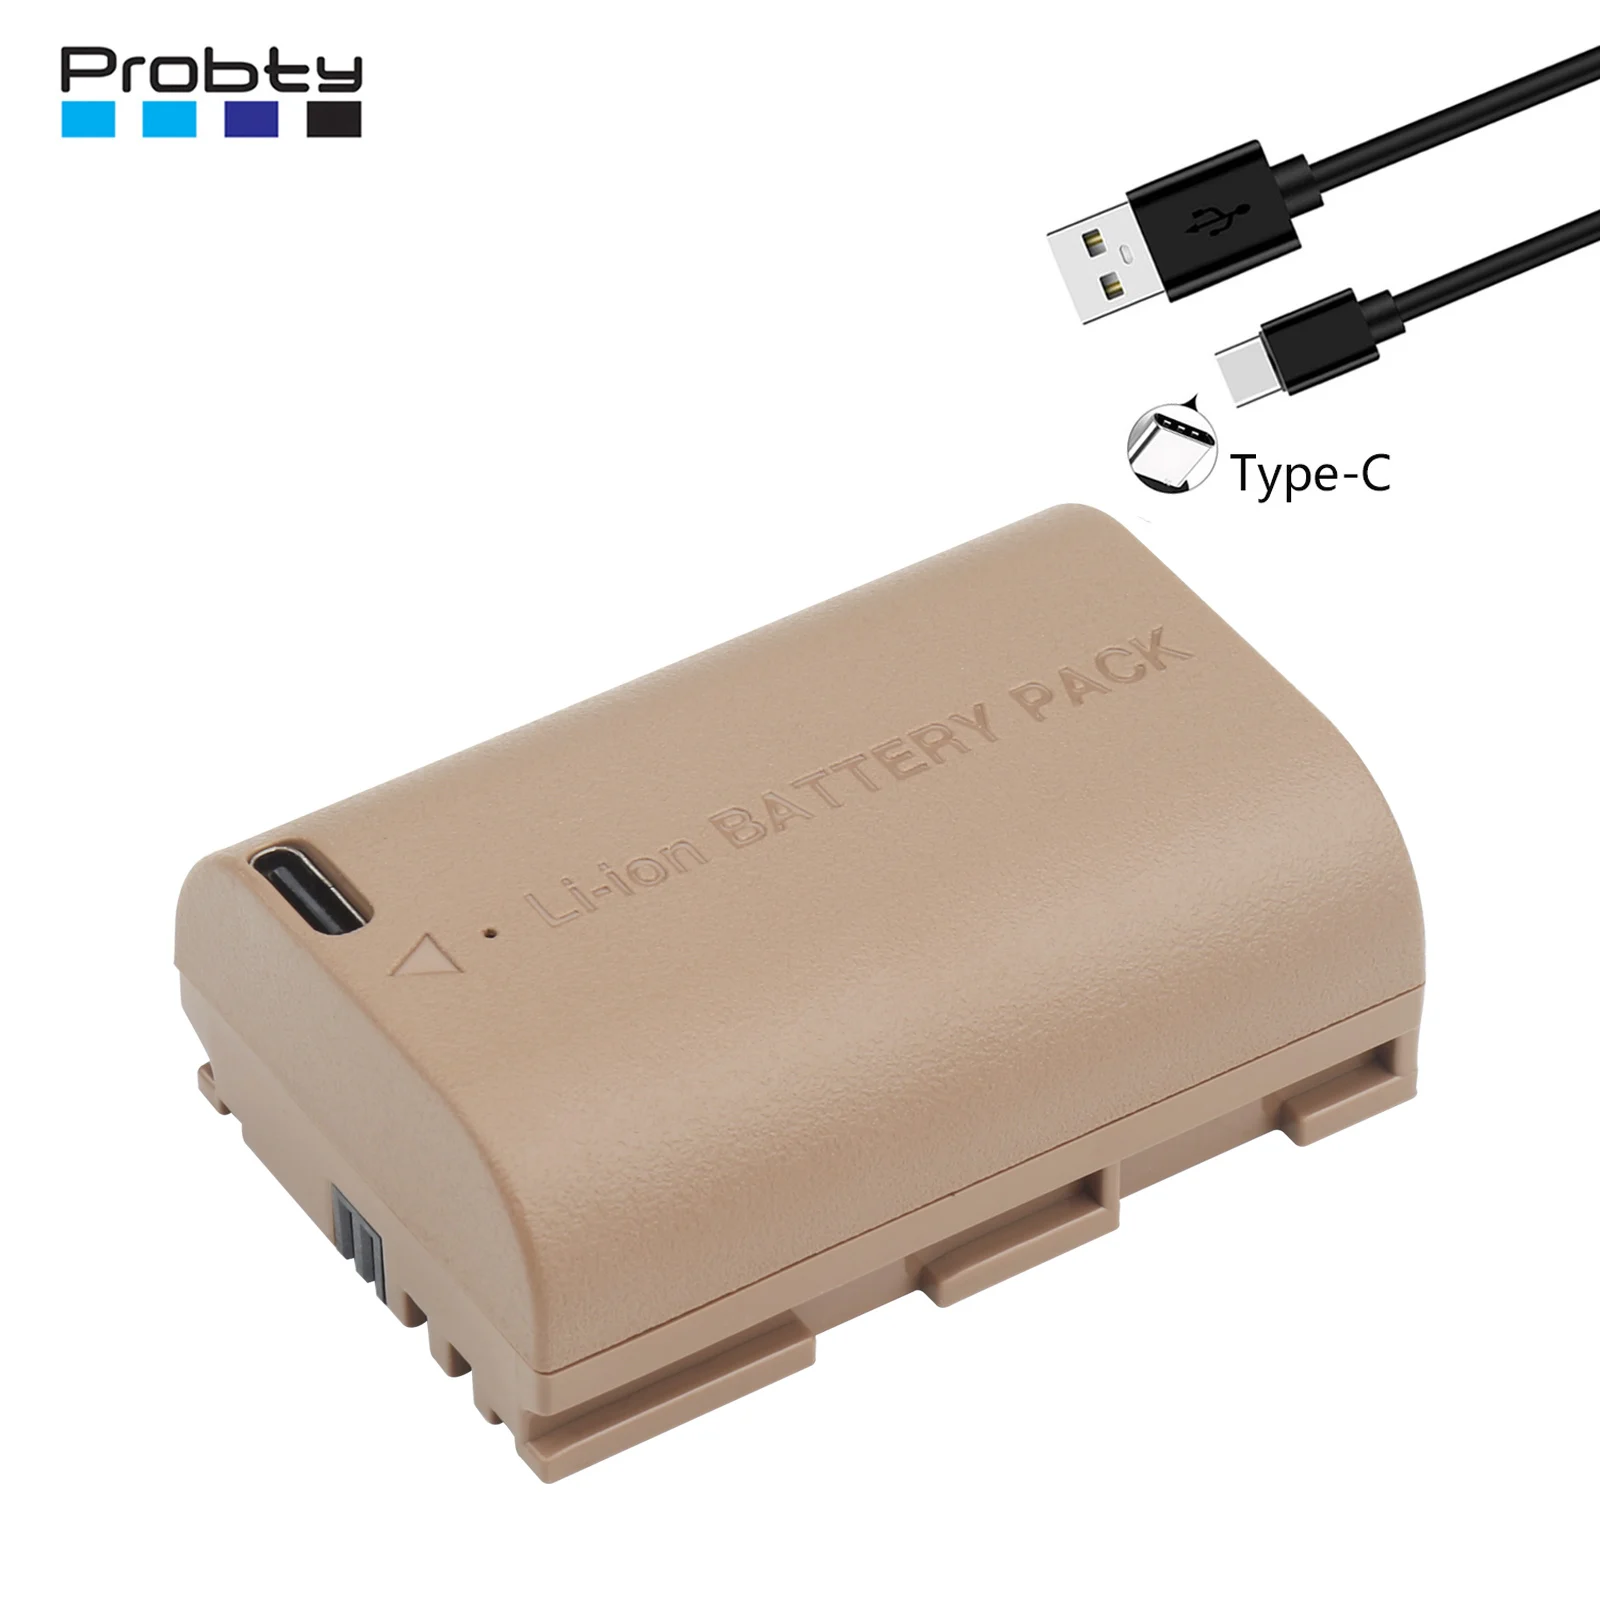 

Probty LP-E6NH LPE6NH Battery 3200mAh with Type-C Input for Canon EOS R R5 R6 5DS 6D 7D 60D 70D 80D 90D